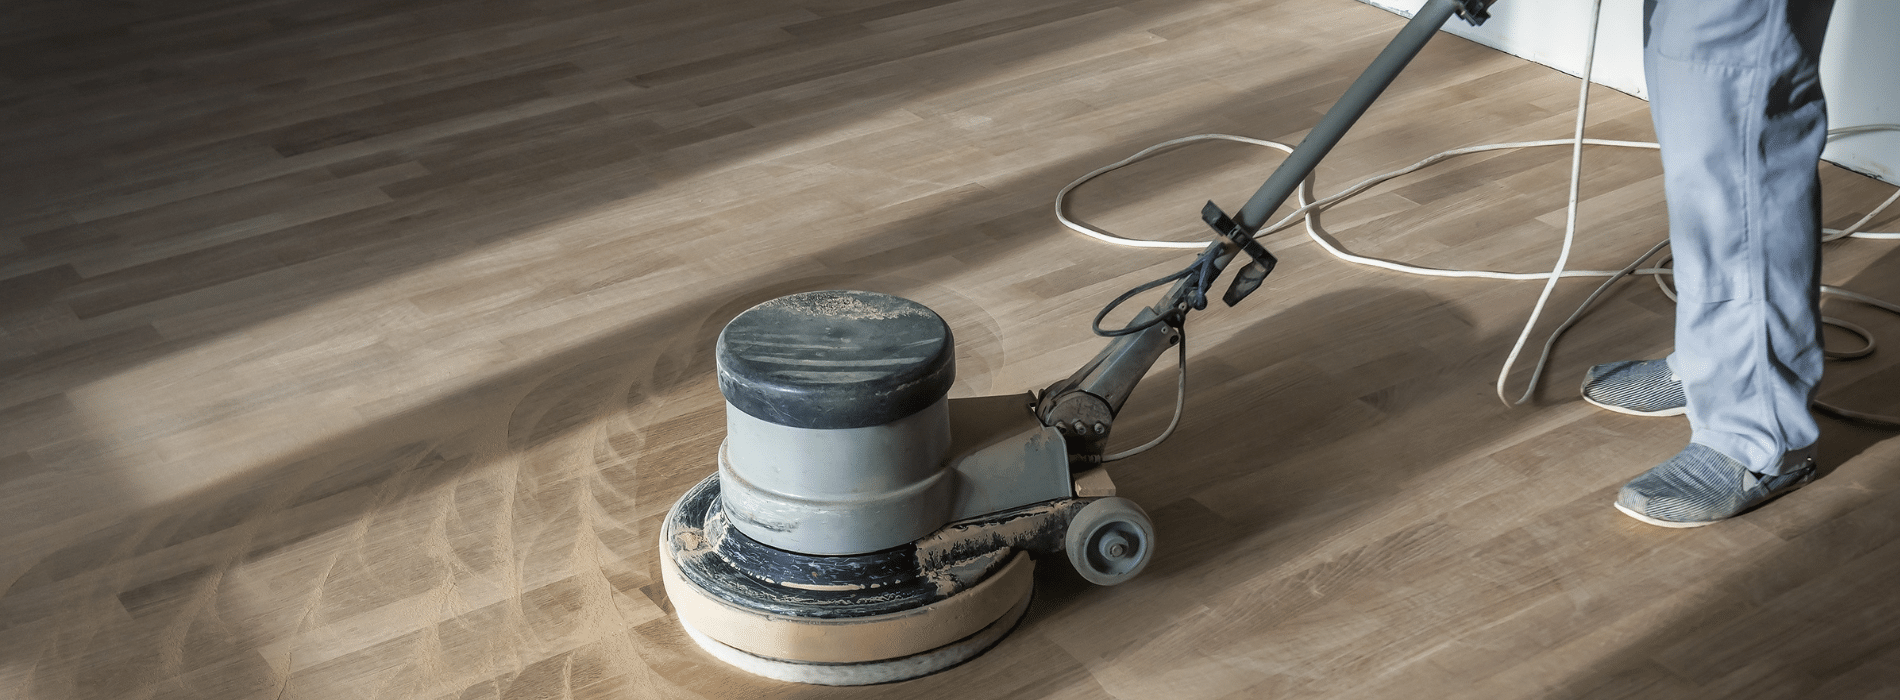 In Notting Hill, W11, Mr Sander® are using a Bona FlexiSand 1.9, a powerful buffer sander with a diameter of 407 mm, 1.9 kW effect, and compatible with 230V power supply at 50 Hz/60 Hz. It is connected to a dust extraction system equipped with a HEPA filter, ensuring a clean and efficient sanding process. 